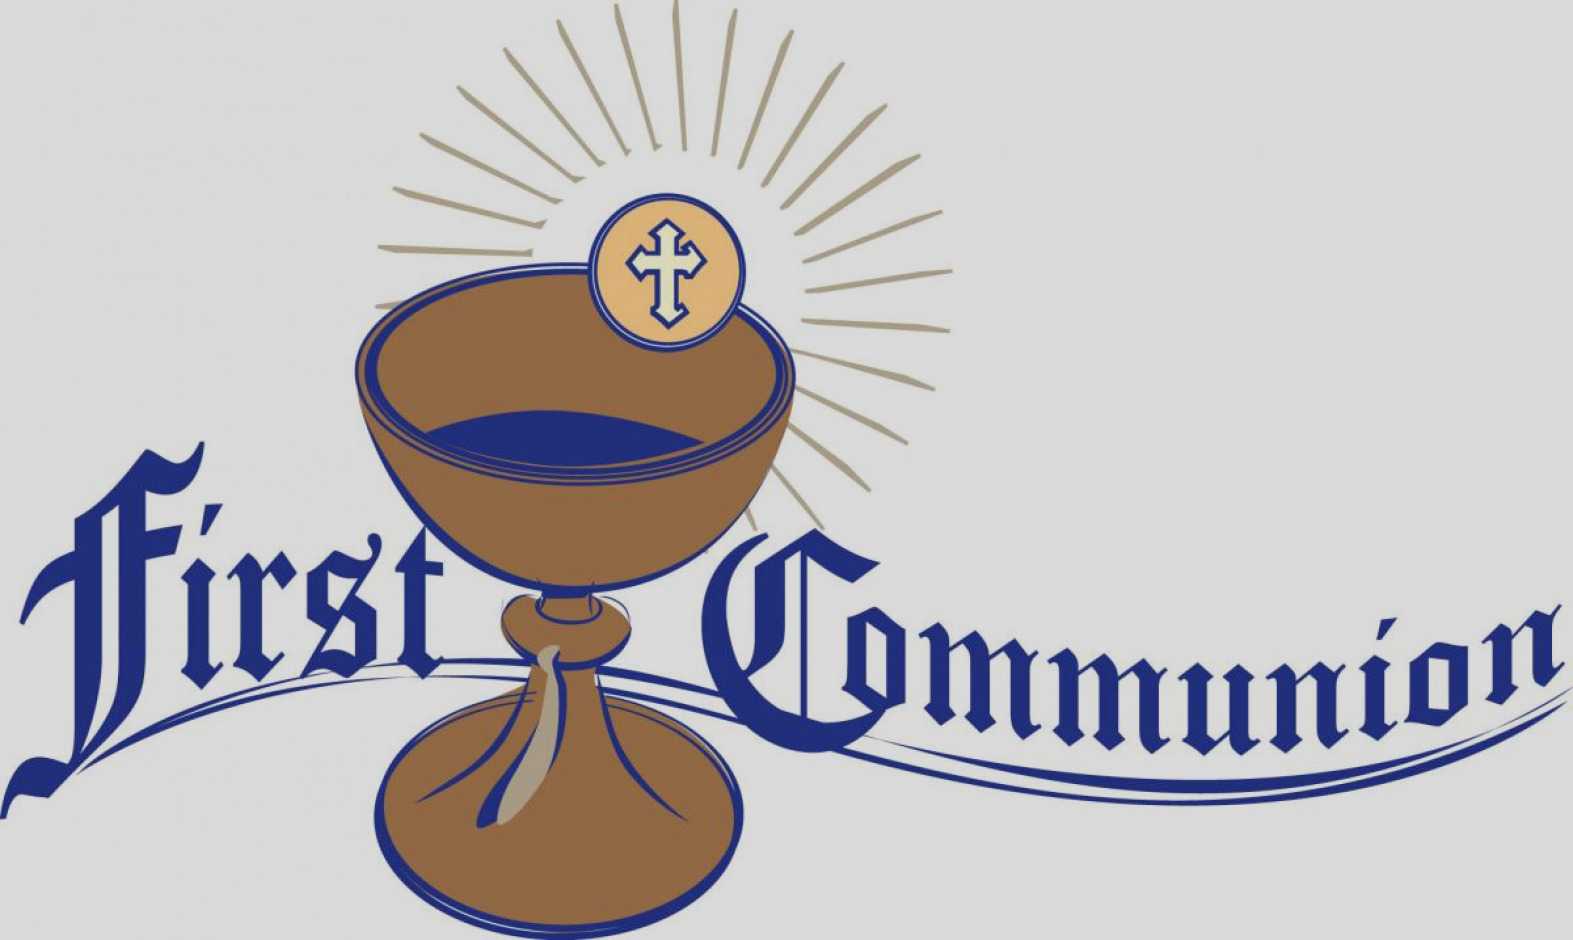 First Clipart Comunion, Picture #42280 First Clipart Comunion For First Holy Communion Banner Templates